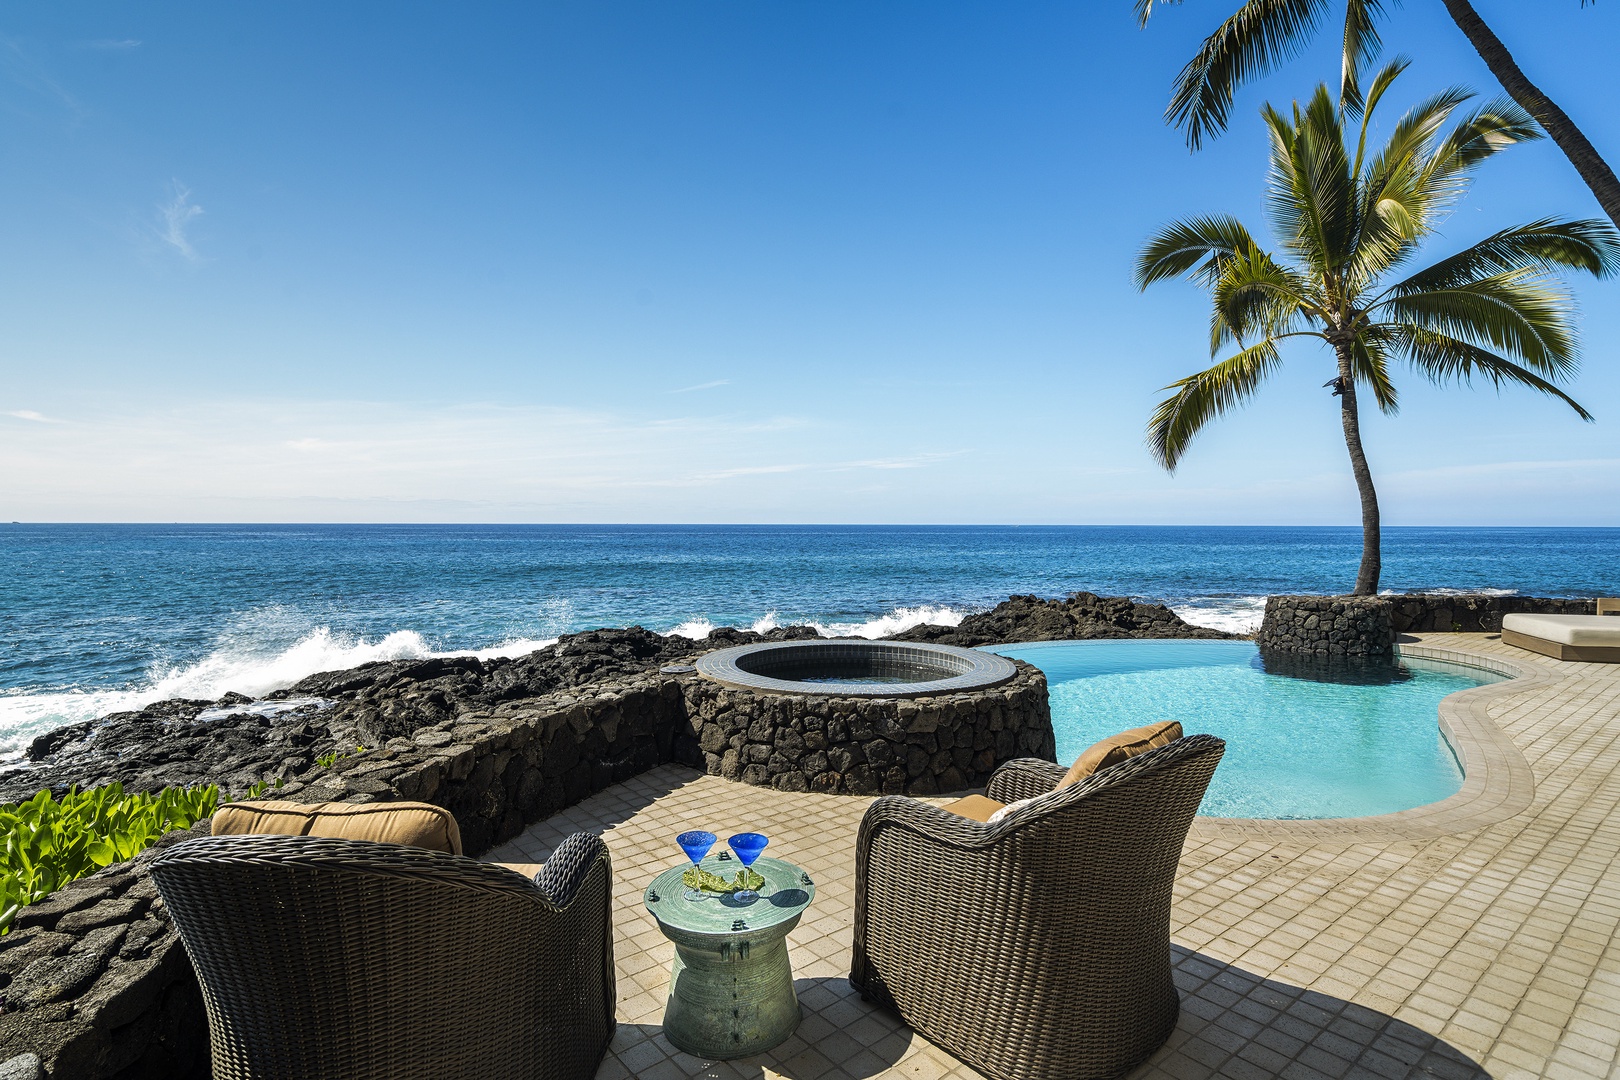 Kailua Kona Vacation Rentals, Ali'i Point #9 - Take a seat at the waters edge with your favorite cocktail!